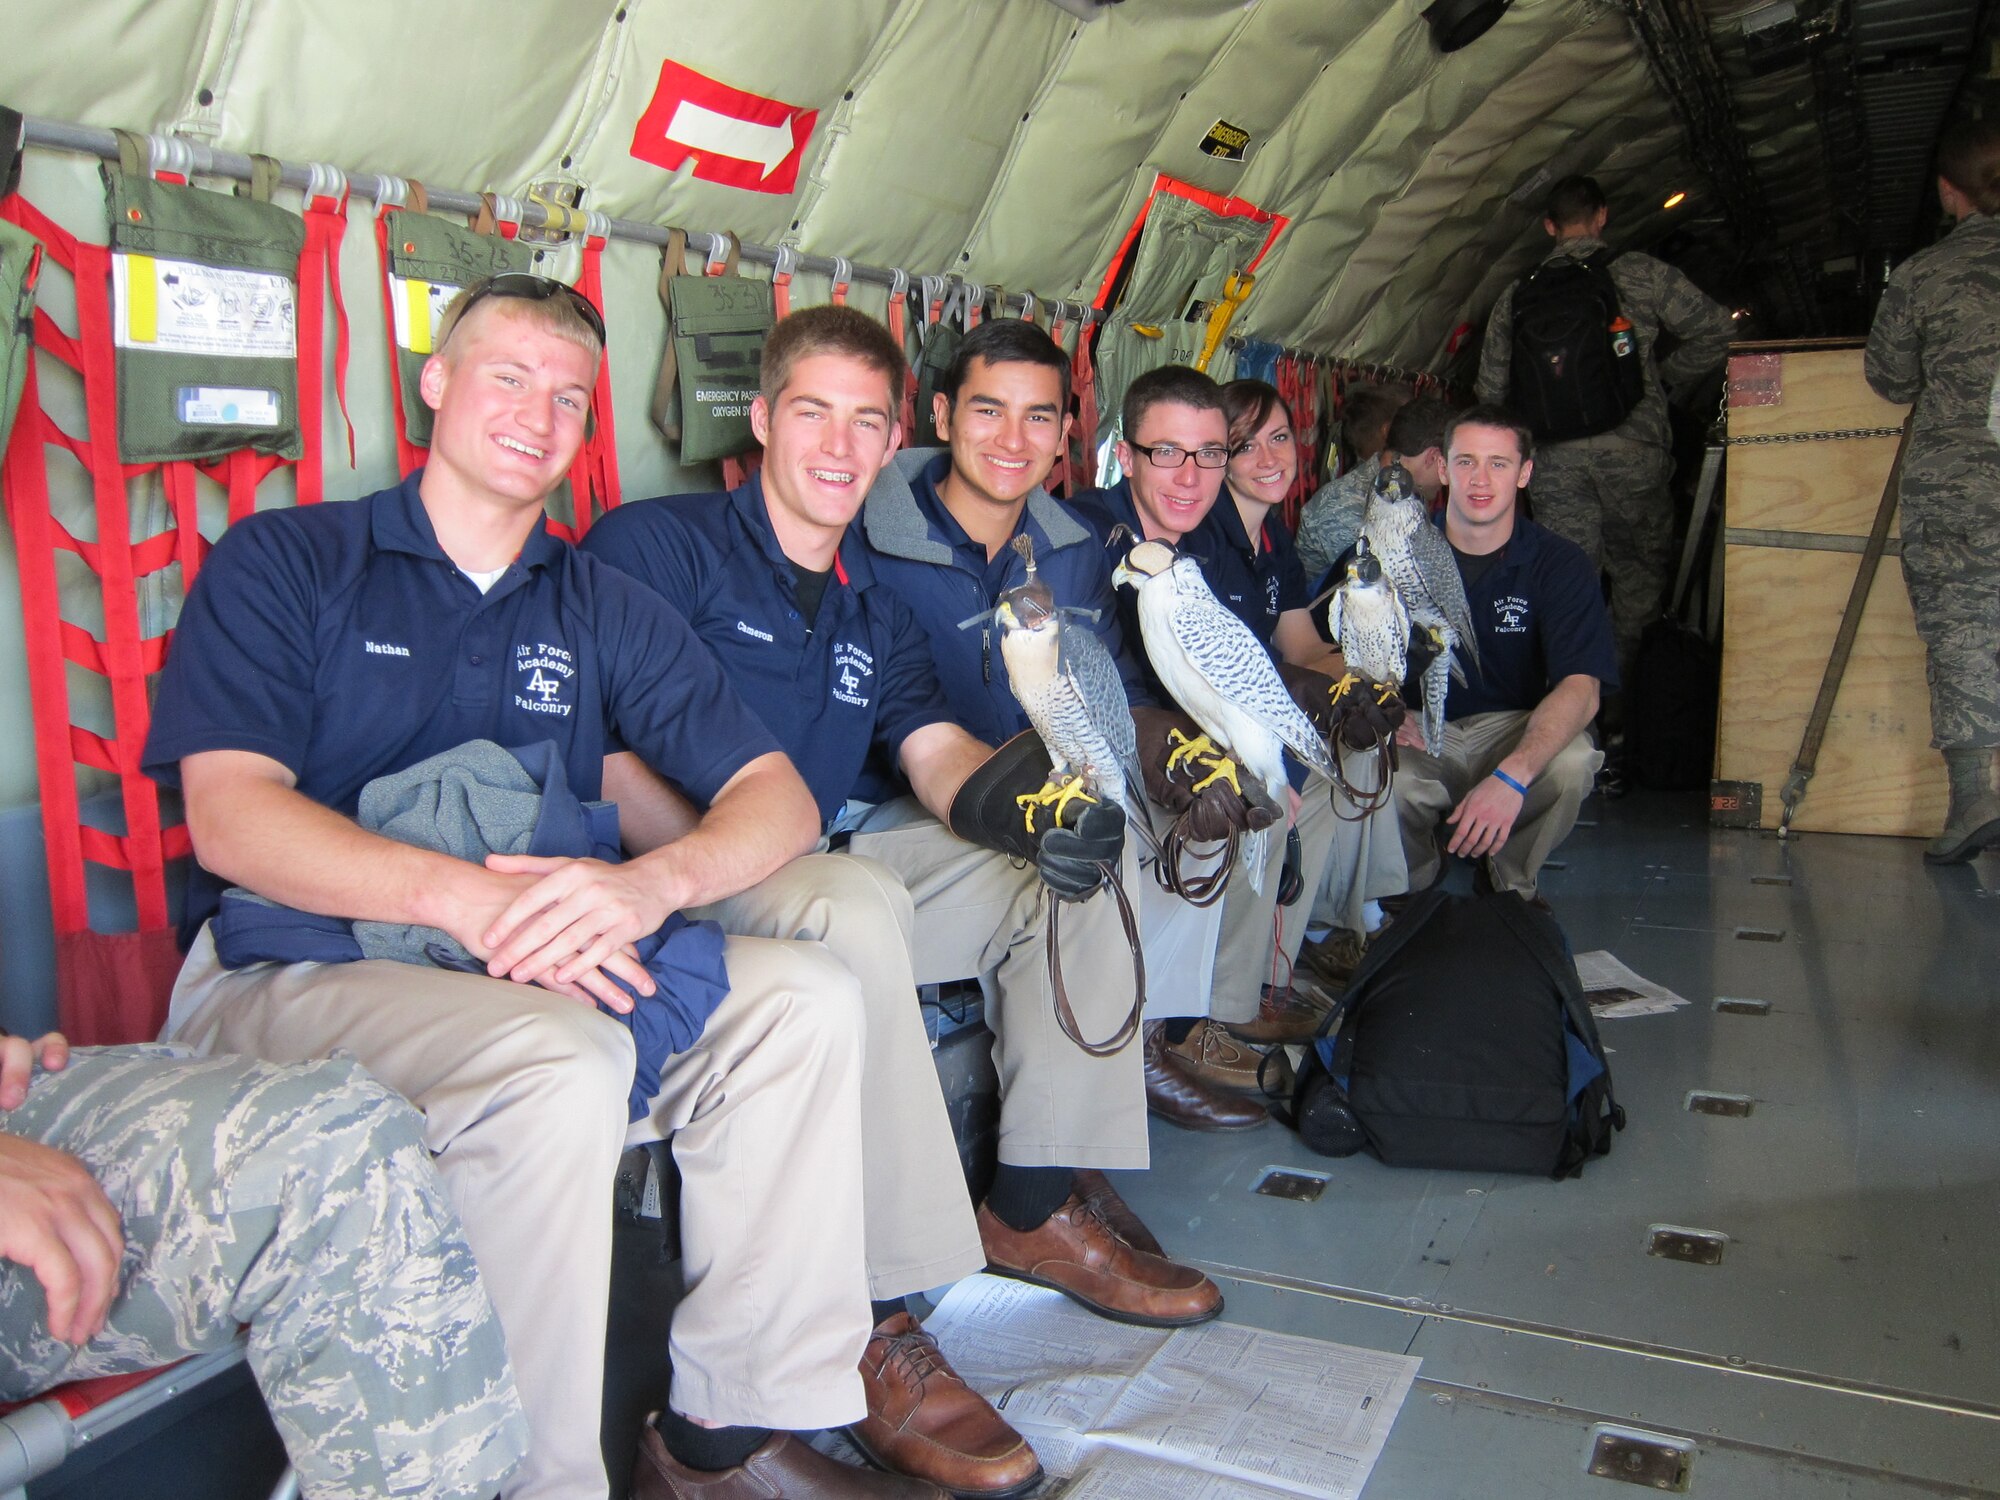 (Left to Right) Air Force Academy Cadets Nathan Lebens, Cameron Harris, Ernesto Guerrero, Trent Grabowski, Jennifer Flynn and 2nd Lt. Ryan Wichman, Officer in Charge of the Air Force Academy Falconry team pose for a photograph with their birds aboard a KC-135 Stratotanker, Oct. 7. Airmen from the 931st Air Refueling Group and the 22nd Air Refueling Wing flew Air Force Academy athletes to South Bend, Indiana to compete against Notre Dame.  (Photo by Lt. Col. Tsuyoshi Tung)